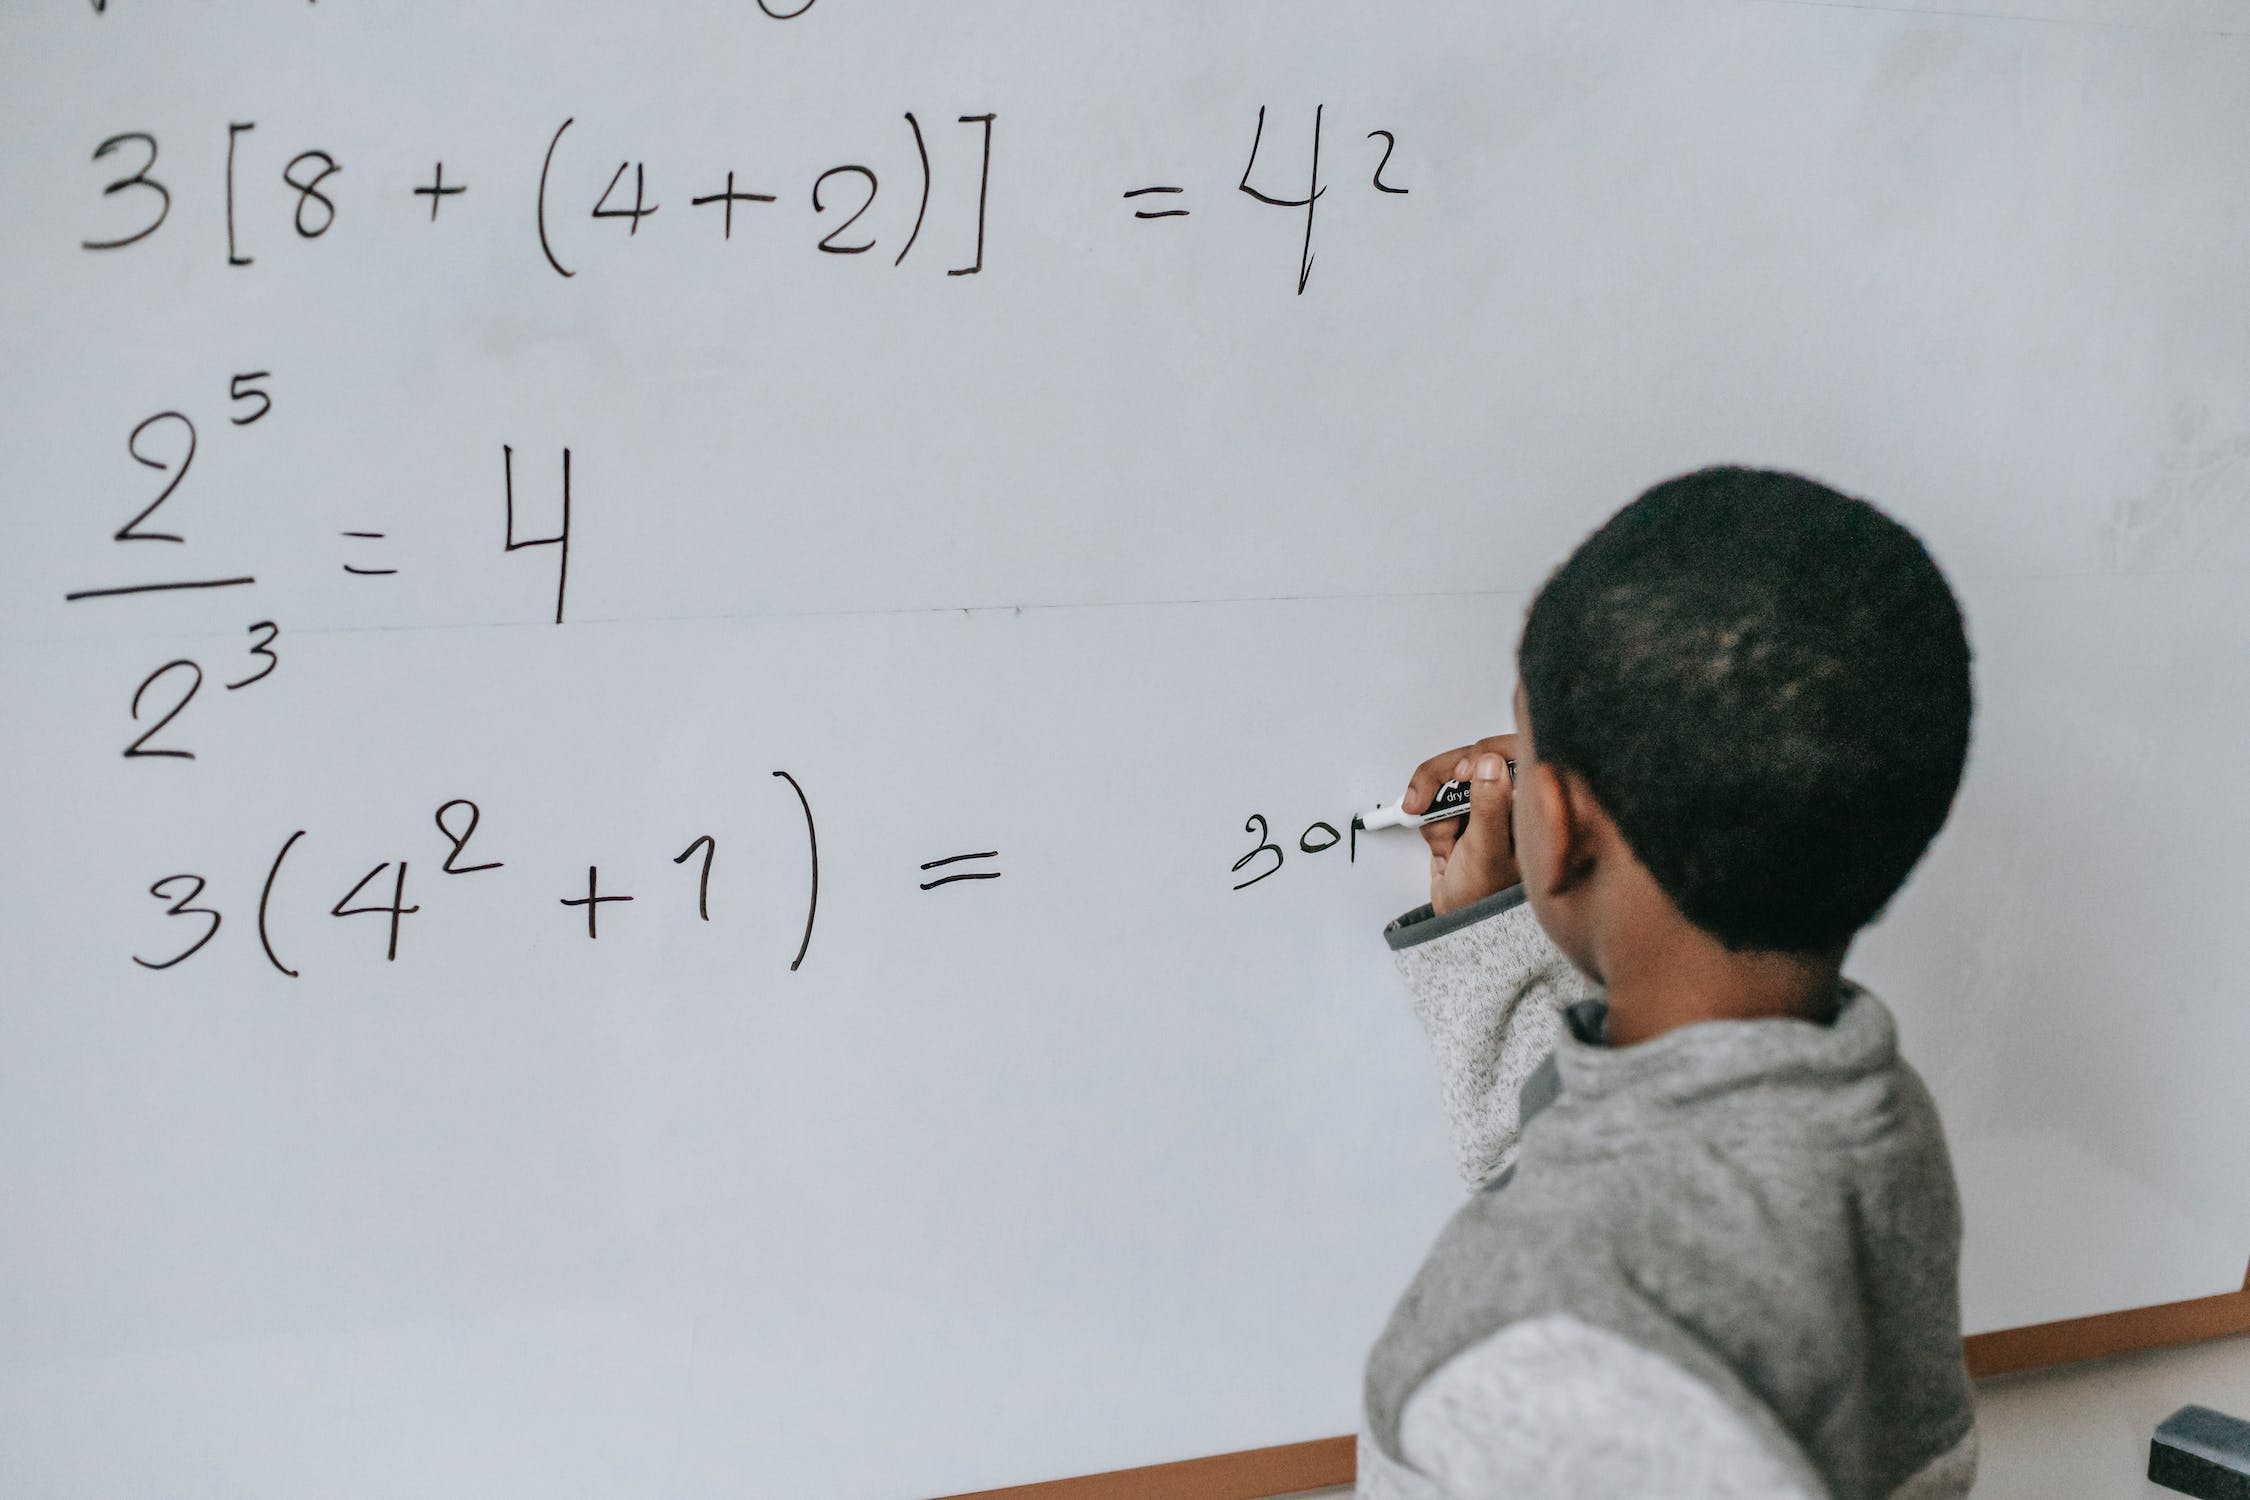 The NSF-funded collaboration between math teacher educators at three universities will challenge the perception of math teaching and learning as a one-size-fits-all approach. Photo by Katerina Holmes, 2020, Pexels.